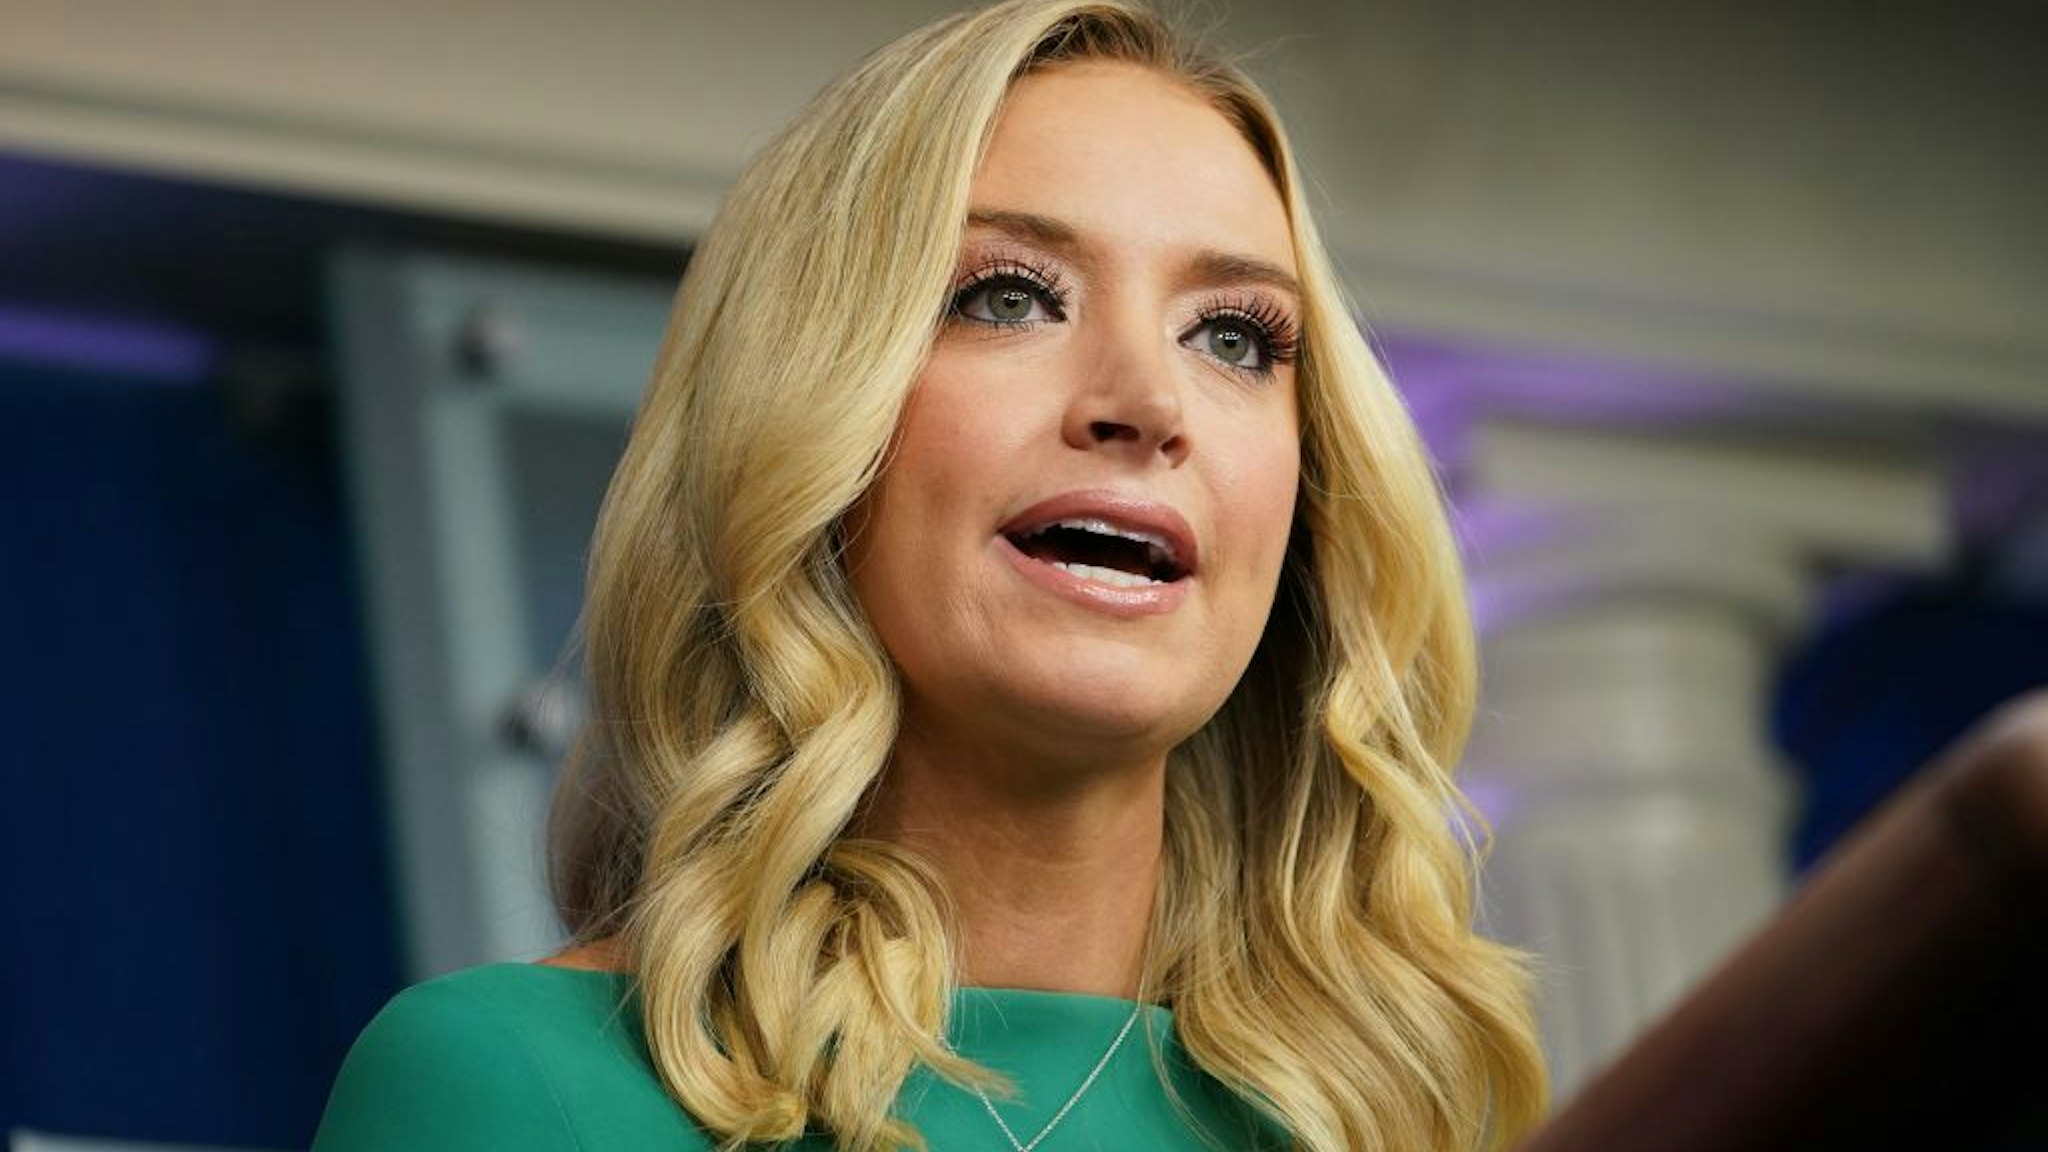 White House Press Secretary Kayleigh McEnany speaks during a press briefing on November 20, 2020, in the Brady Briefing Room of the White House in Washington, DC. (Photo by MANDEL NGAN / AFP) (Photo by MANDEL NGAN/AFP via Getty Images)